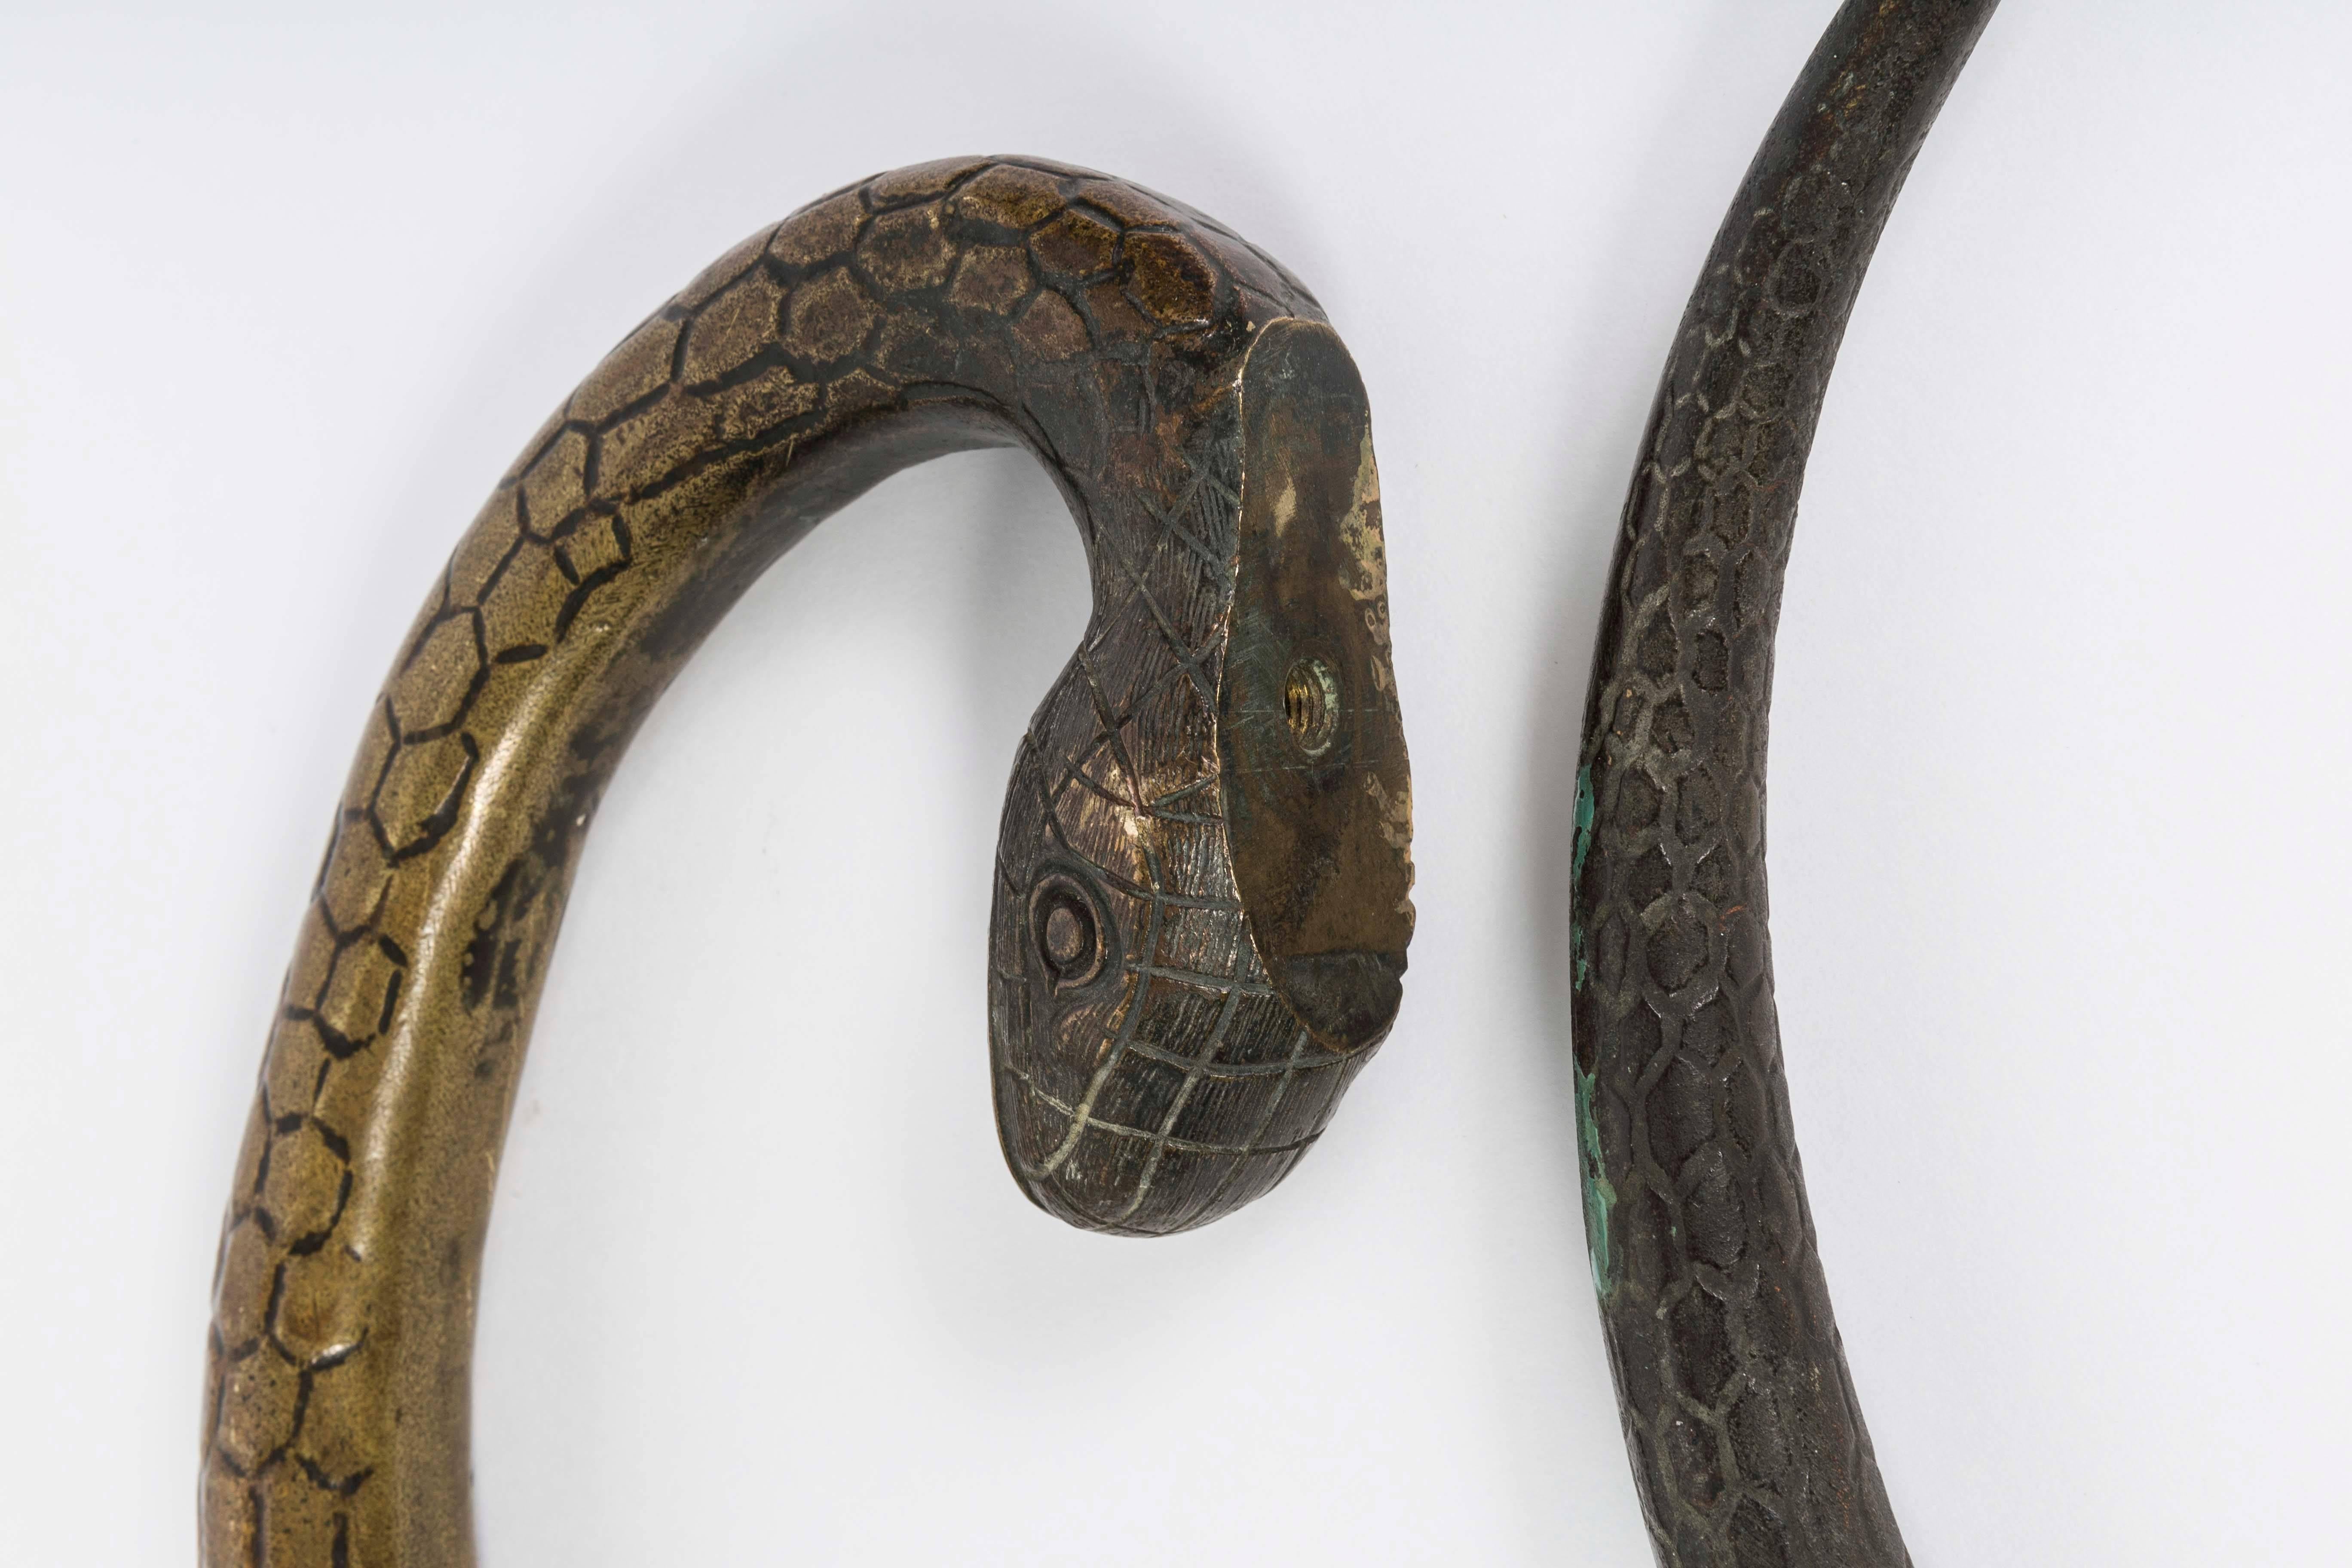 This is a very unusual pair of 19th Century bronze door handles fashioned in a curving snake design. This pair of bronze snake handles are large in size and very heavy which makes them impressive.  They have a very smooth finish with intricate